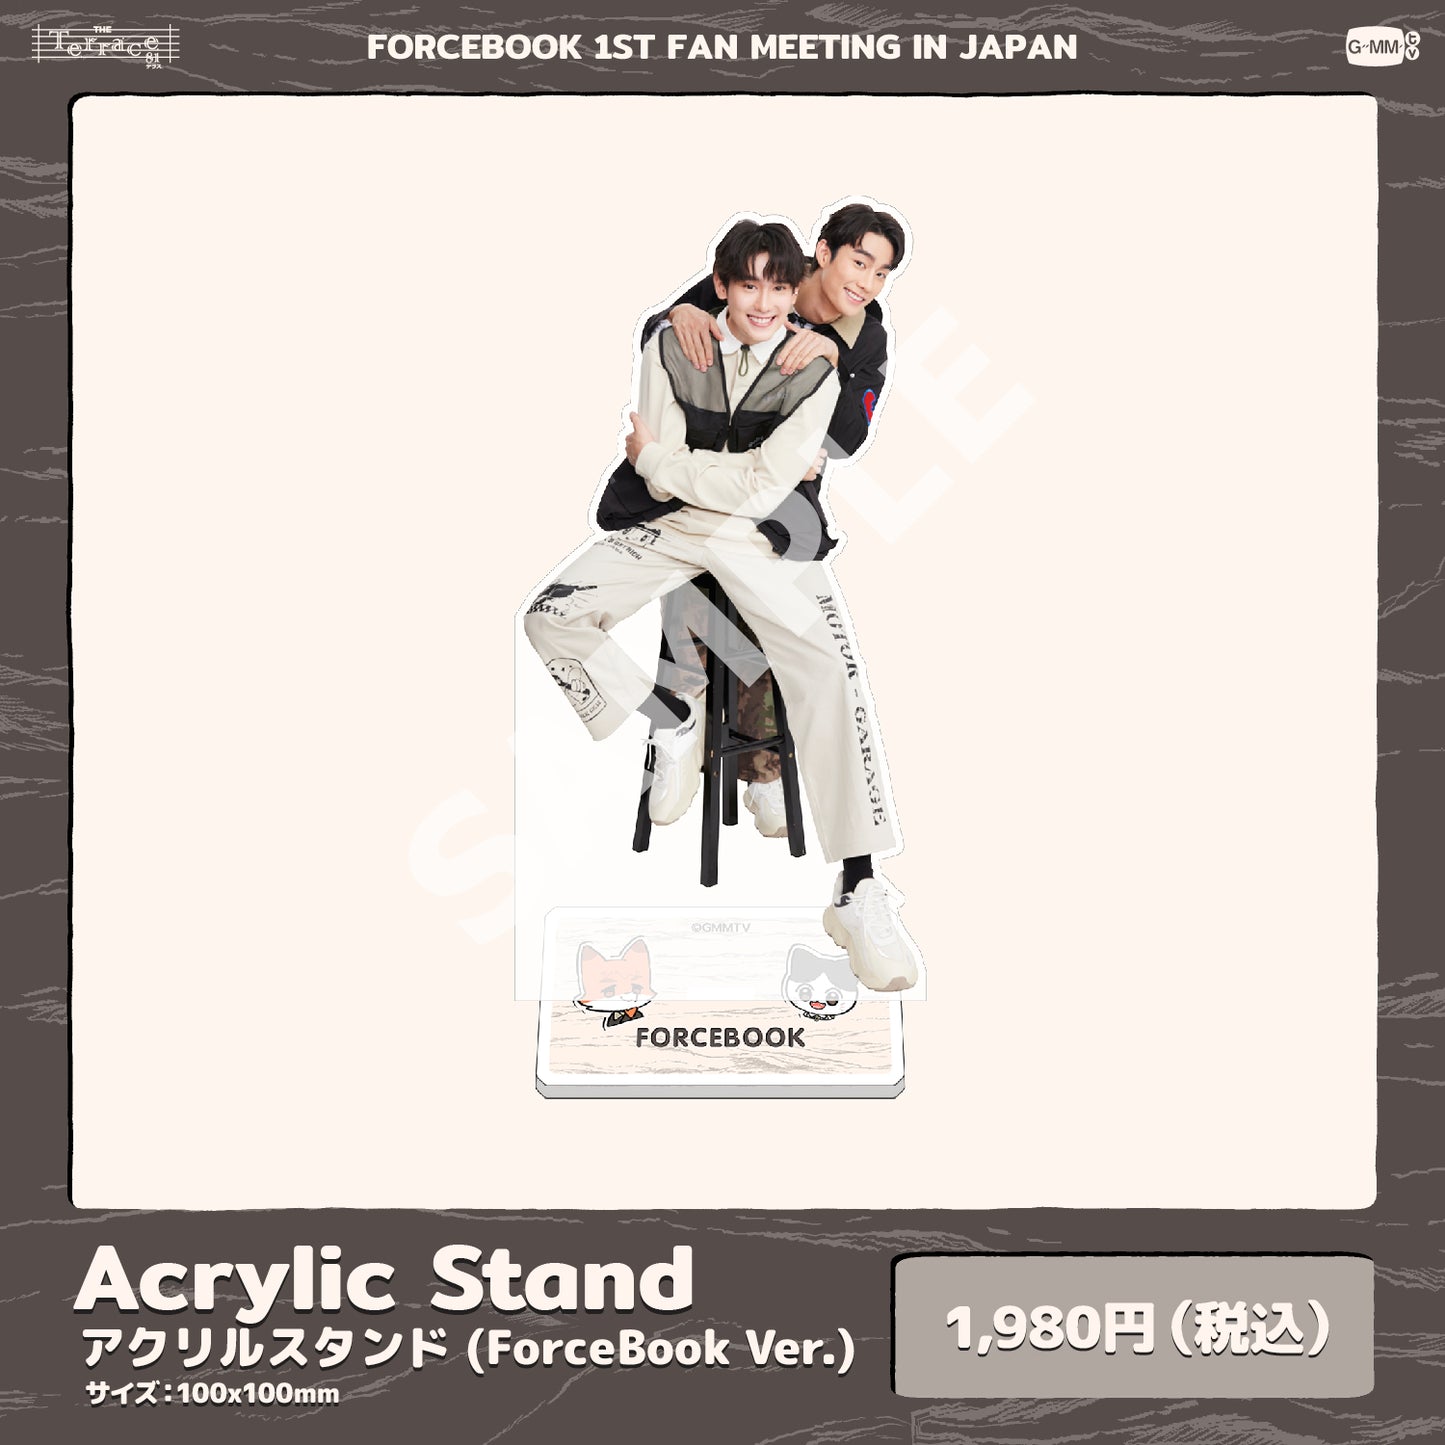 Acrylic Stand 2 (ForceBook Ver.)